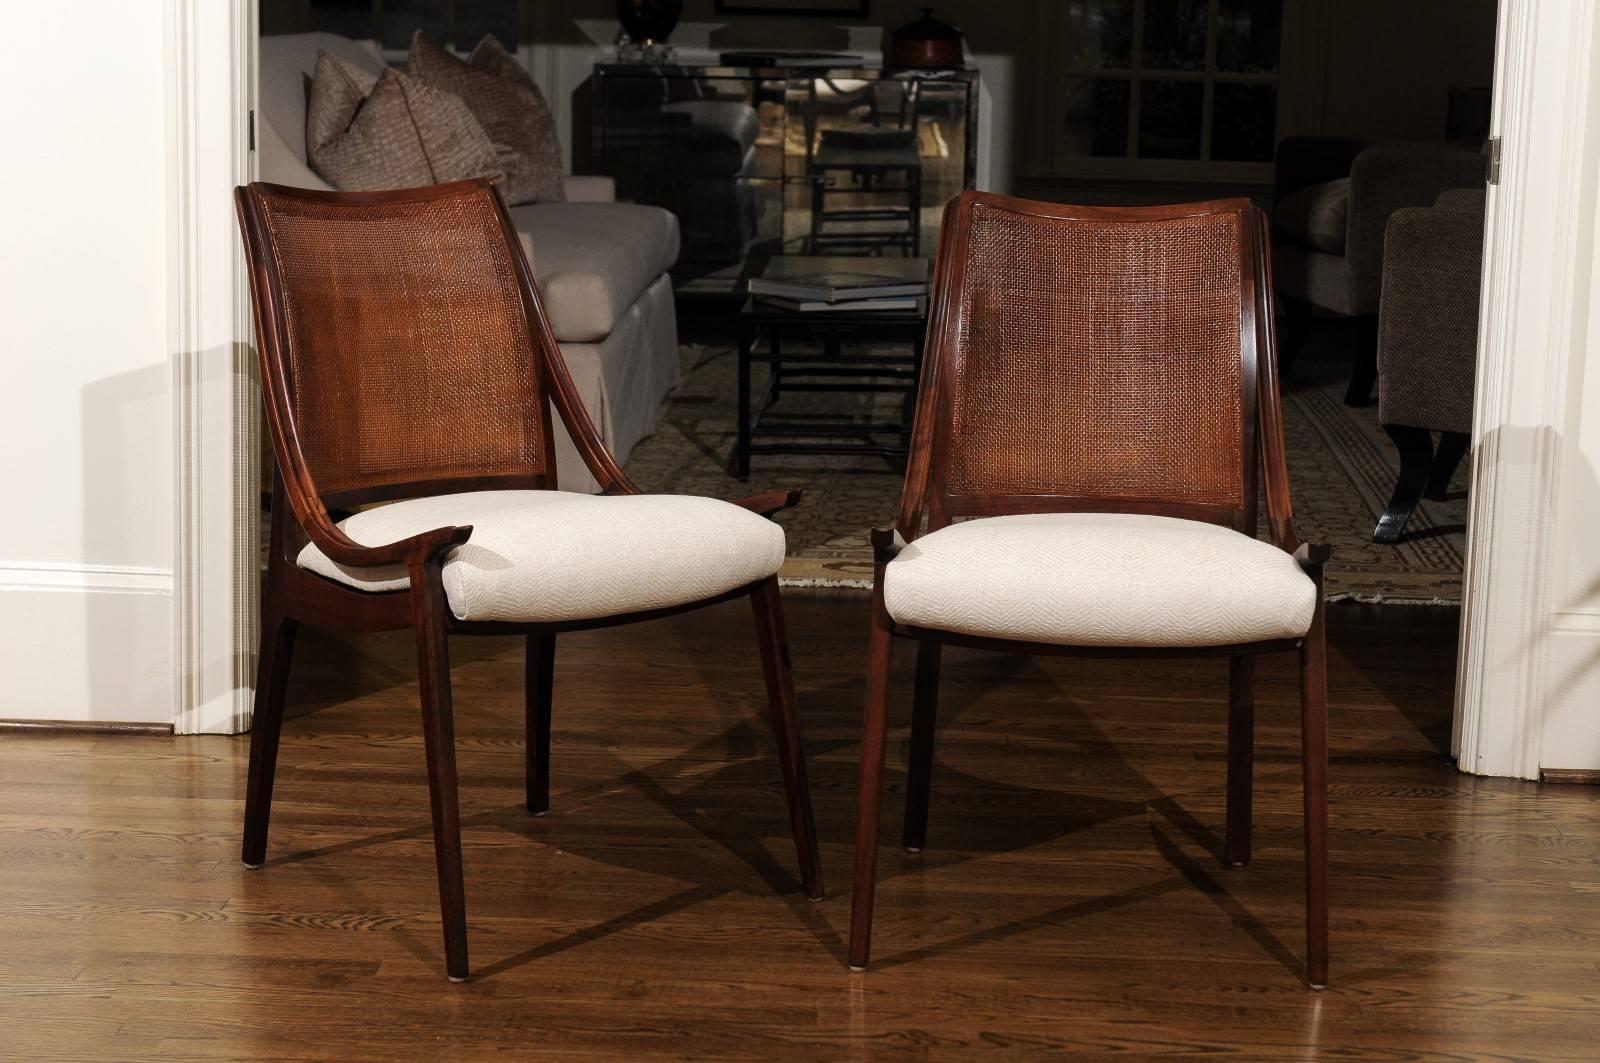 The rarest of the rare: An exceptional, meticulously restored set of eight (8) cane back dining chairs by John Kapel for Glenn of California, circa 1960. Expertly crafted solid Walnut construction with stellar lines and detail. Delicate cane panel